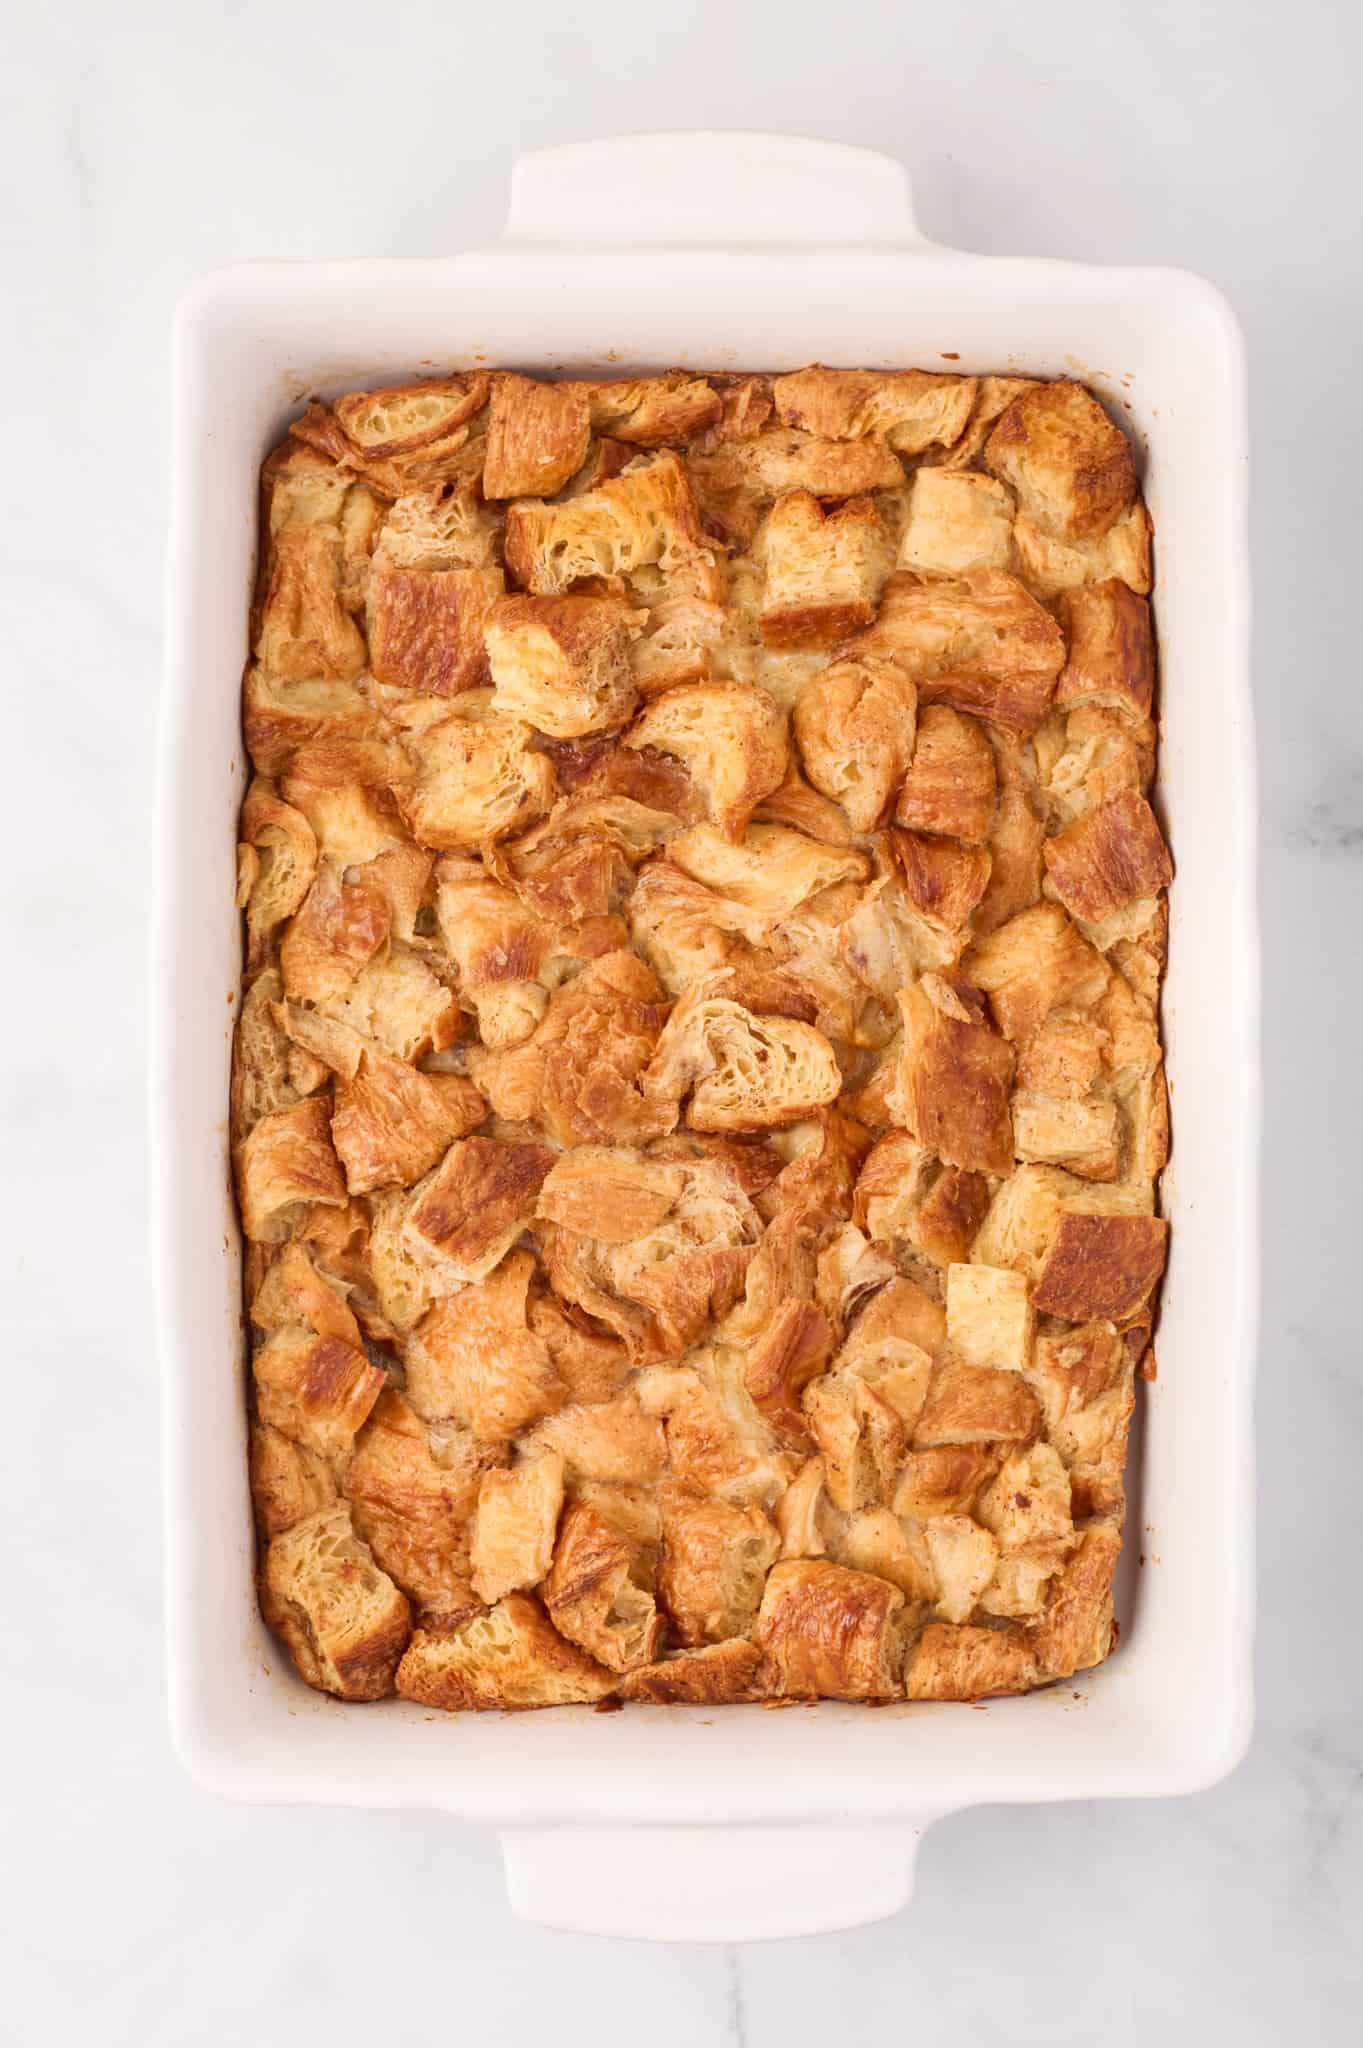 Croissant Bread Pudding is a sweet breakfast treat made with chopped butter croissants baked in an egg custard mixture and topped with a sweet vanilla sauce.